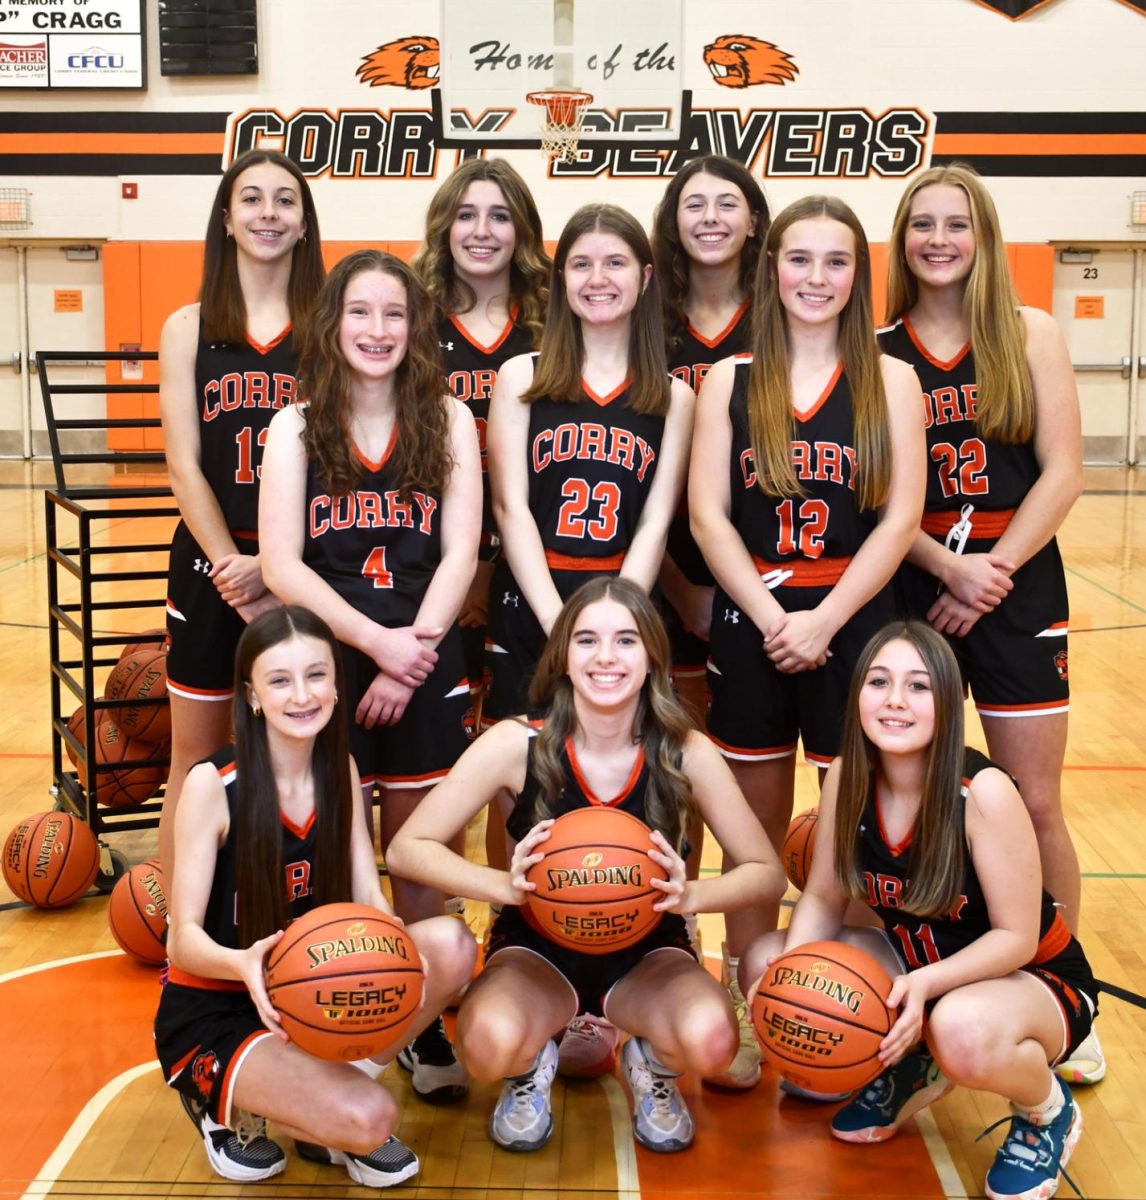 JV girls basketball team. Starting at the top from left to right: Haley Mumau, Rylee Nickerson, Regan Kemp, Grace Allen, Kaylee Barber, Lily Light, Alison Yetzer, Molly Irwin, Isabella OConnor, and Leah Mitchell. 